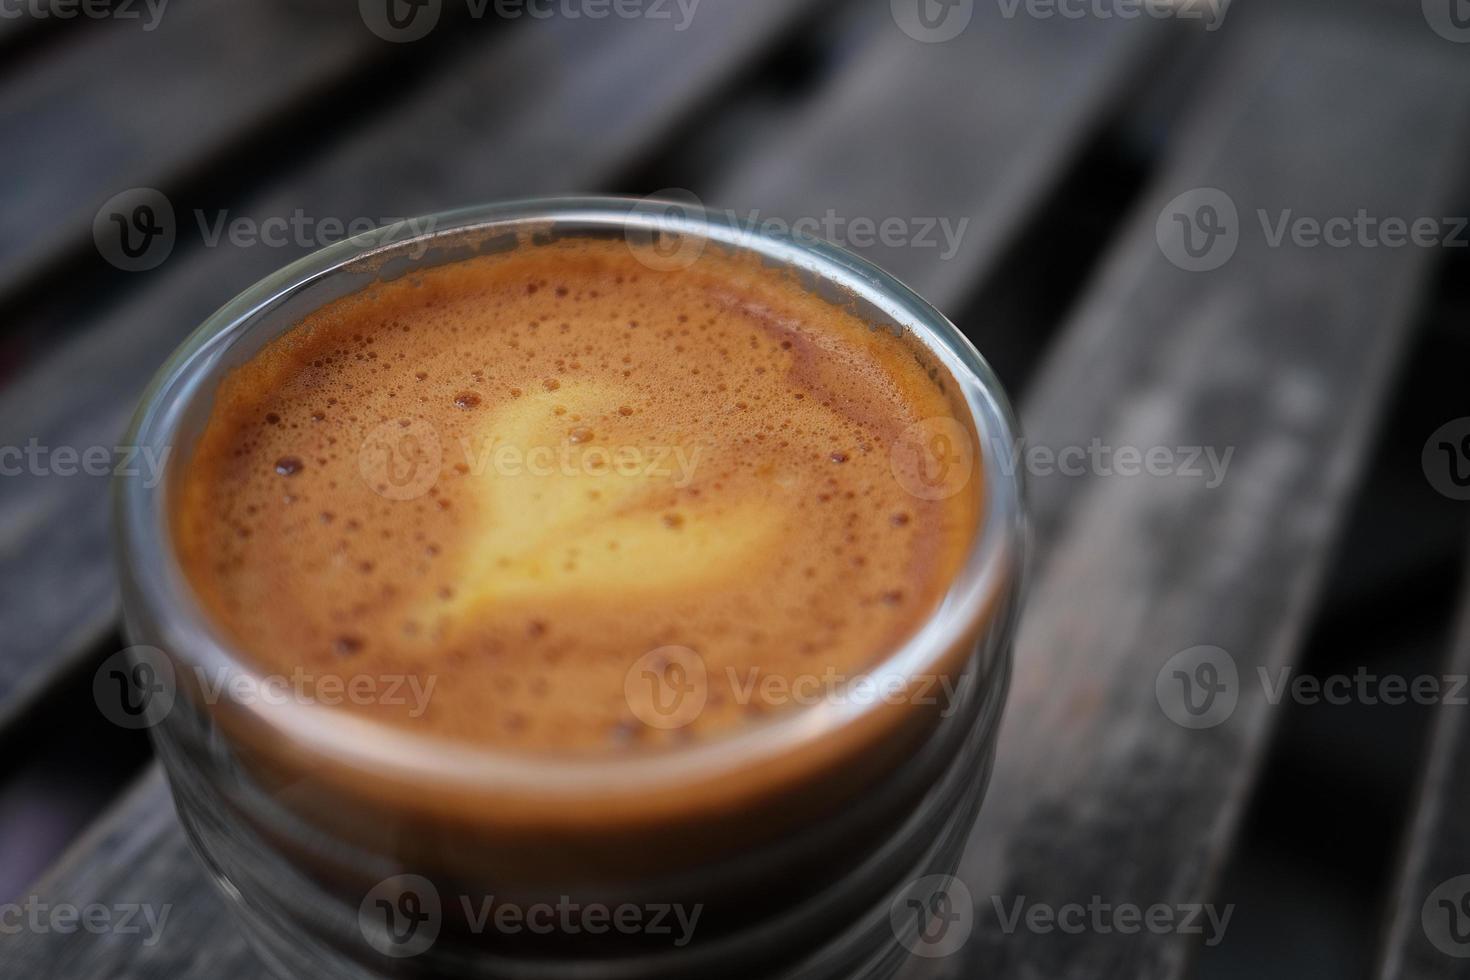 Close up photo of a coffee glass with a mix of espresso and orange juice, showing bright foam with blurred background.